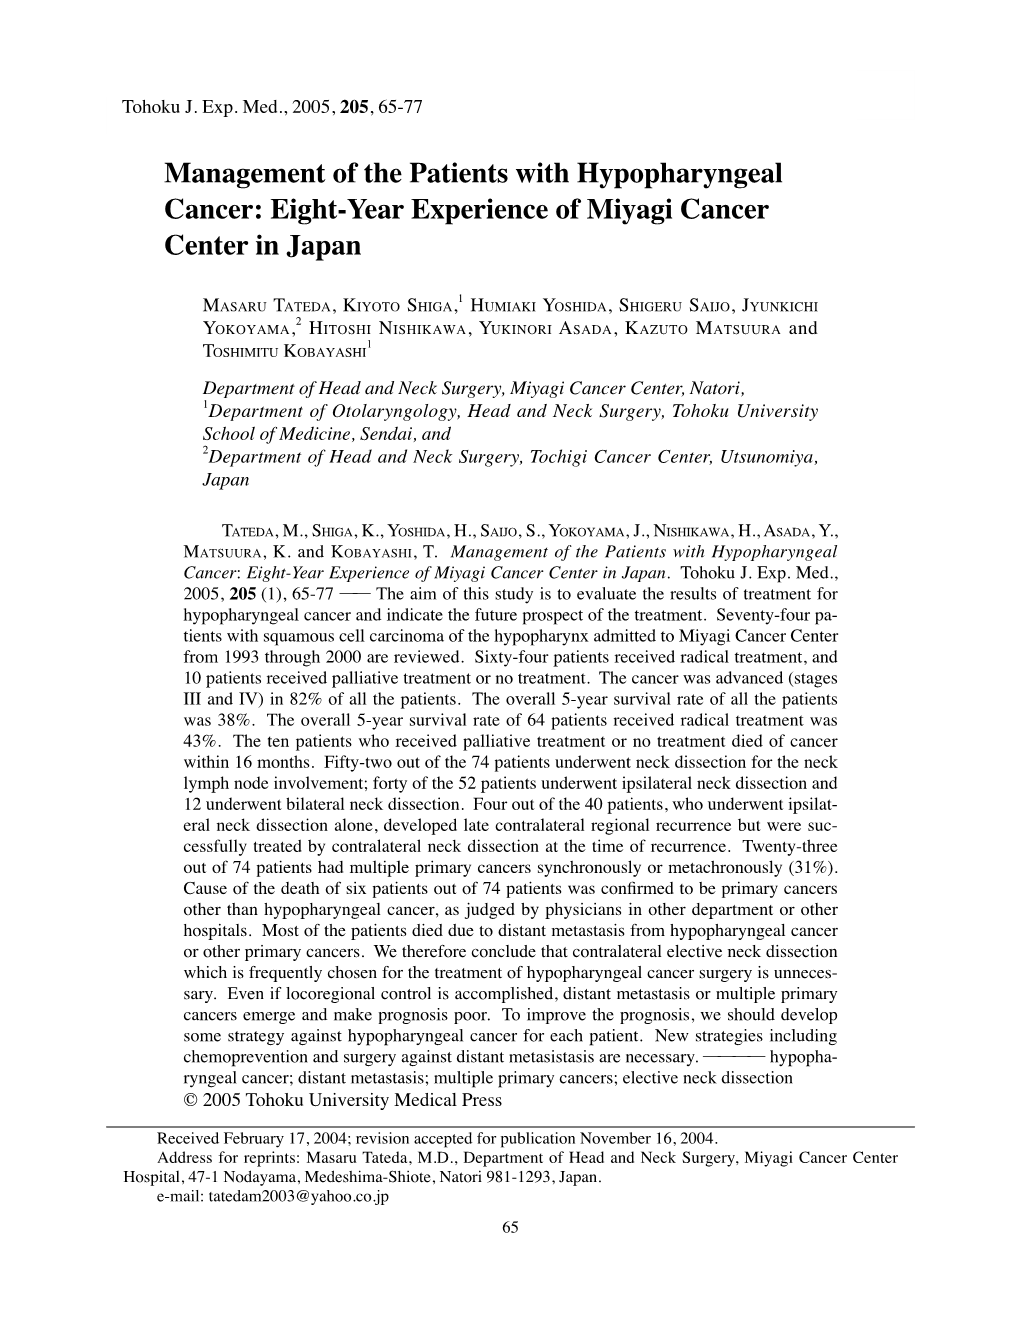 Management of the Patients with Hypopharyngeal Cancer: Eight-Year Experience of Miyagi Cancer Center in Japan